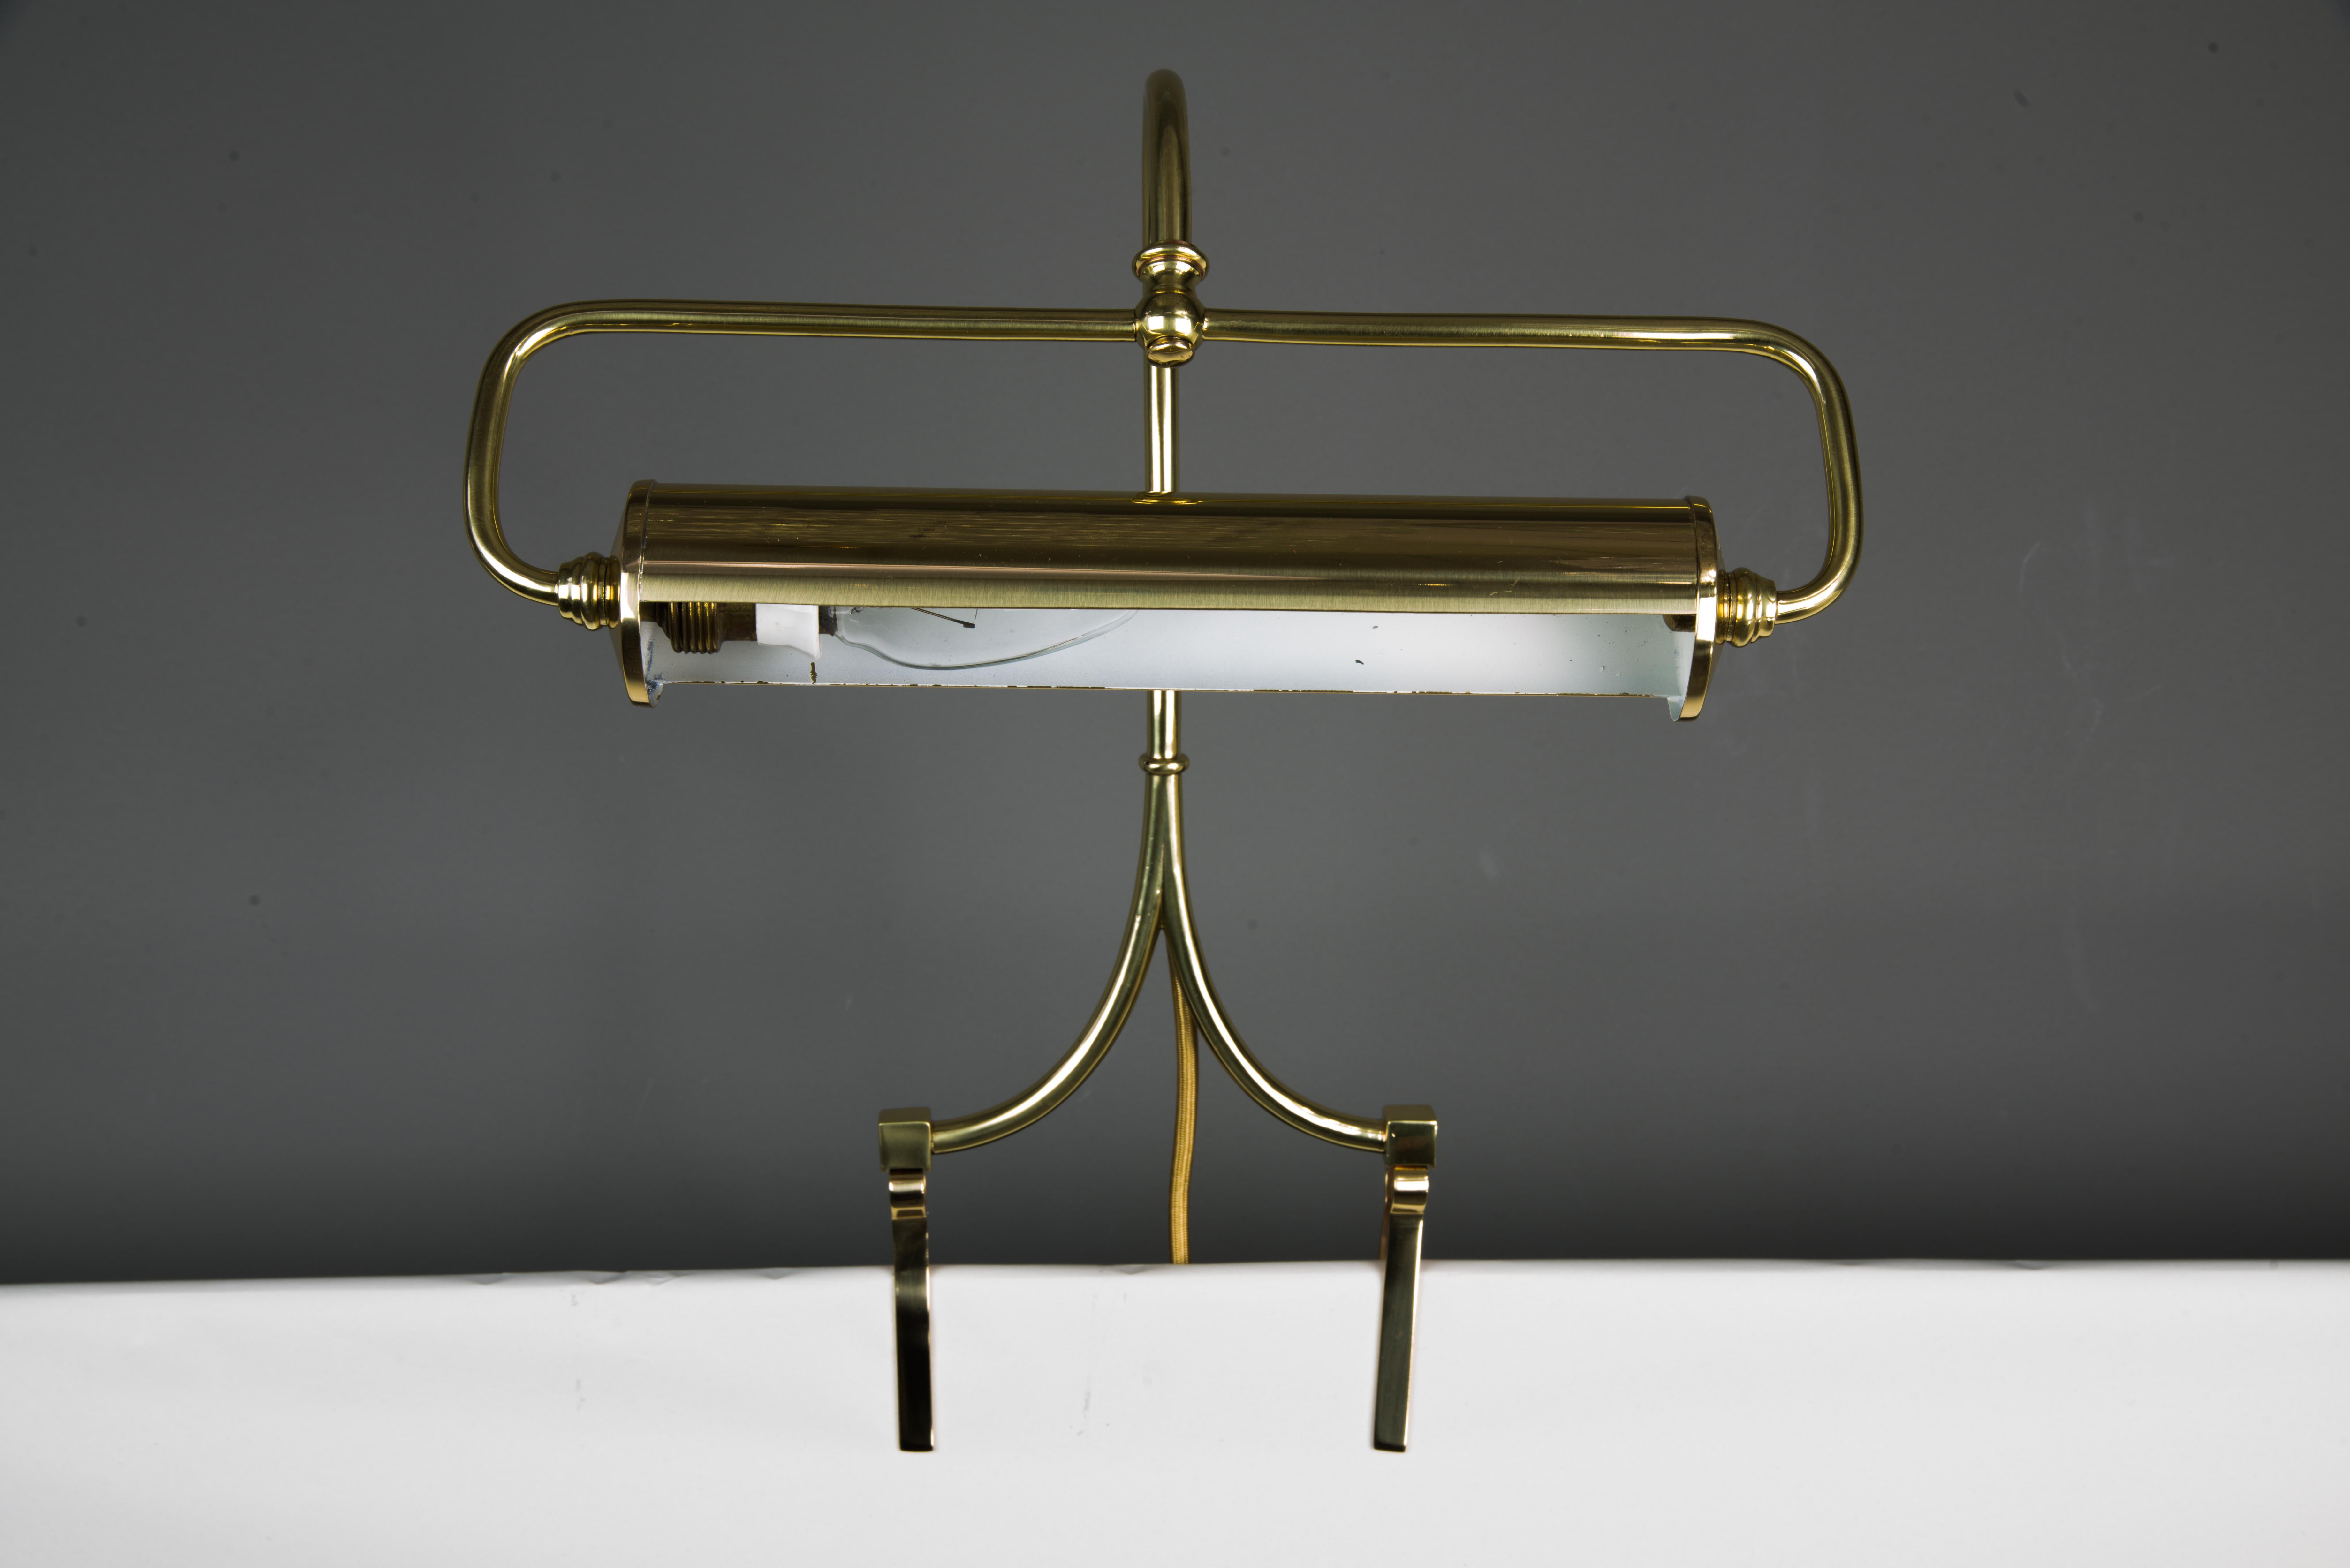 Art Deco brass piano note stand lamp, circa 1920s
Polished and stove enameled.